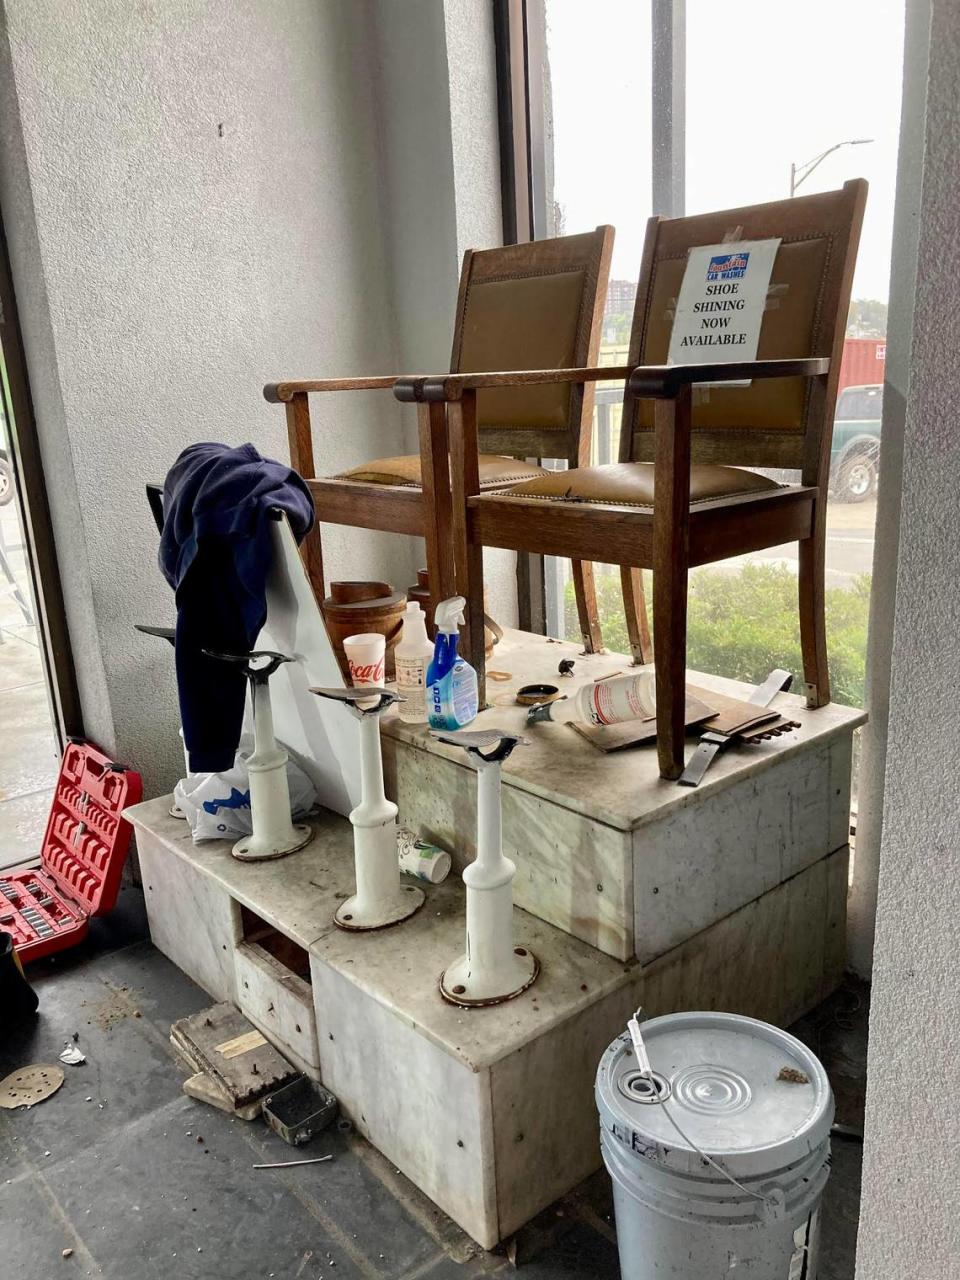 The new owners of this Macon mainstay are keeping something unique to the car wash: a single-manned shoe shine station. They’re also upgrading shoe shine station.